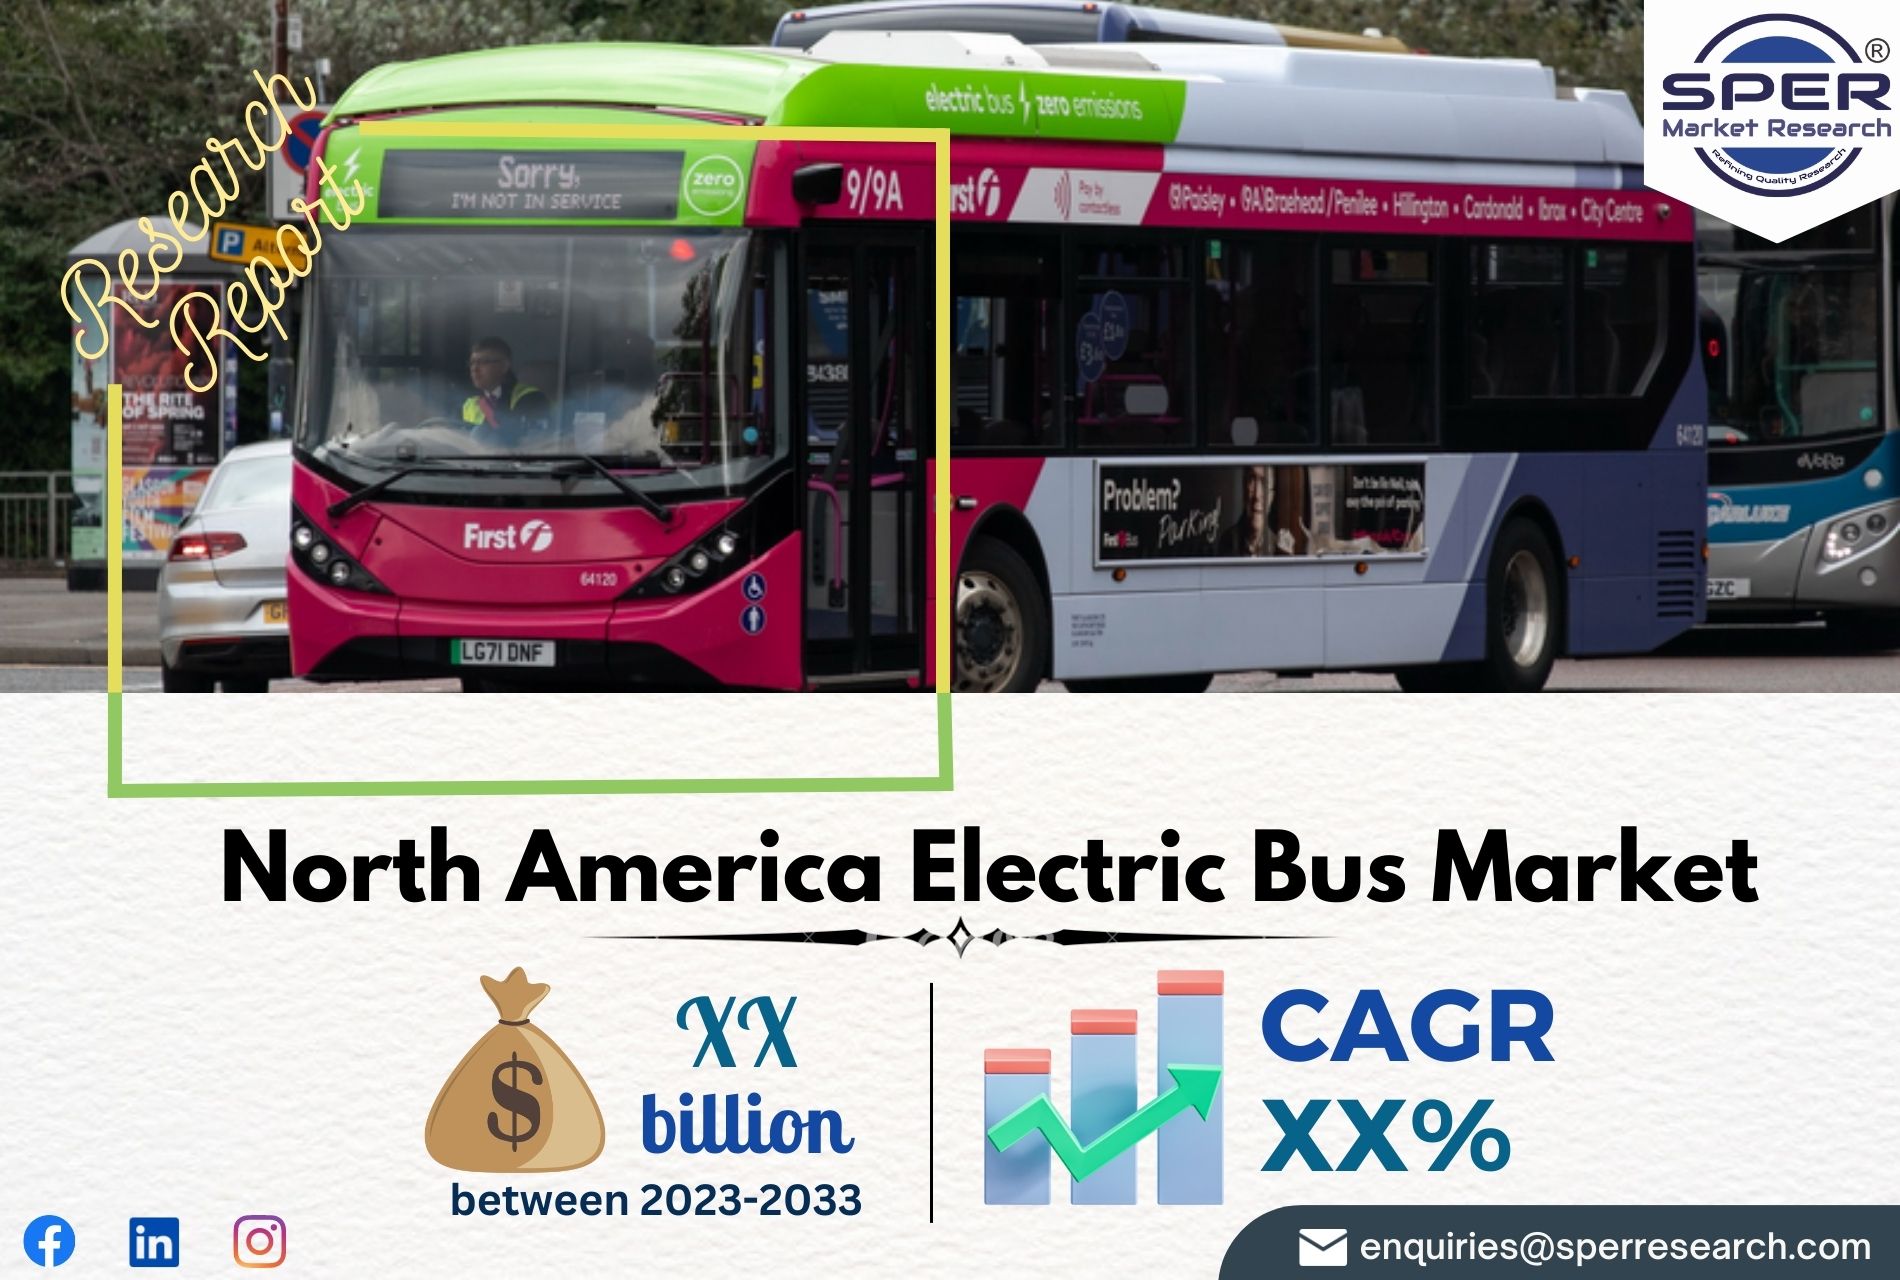 North America Electric Bus Market Share 2023, Growth Drivers, Trends Analysis under Key Manufacturer, Revenue, Competitive Analysis and Future Scope 2033: SPER Market Research